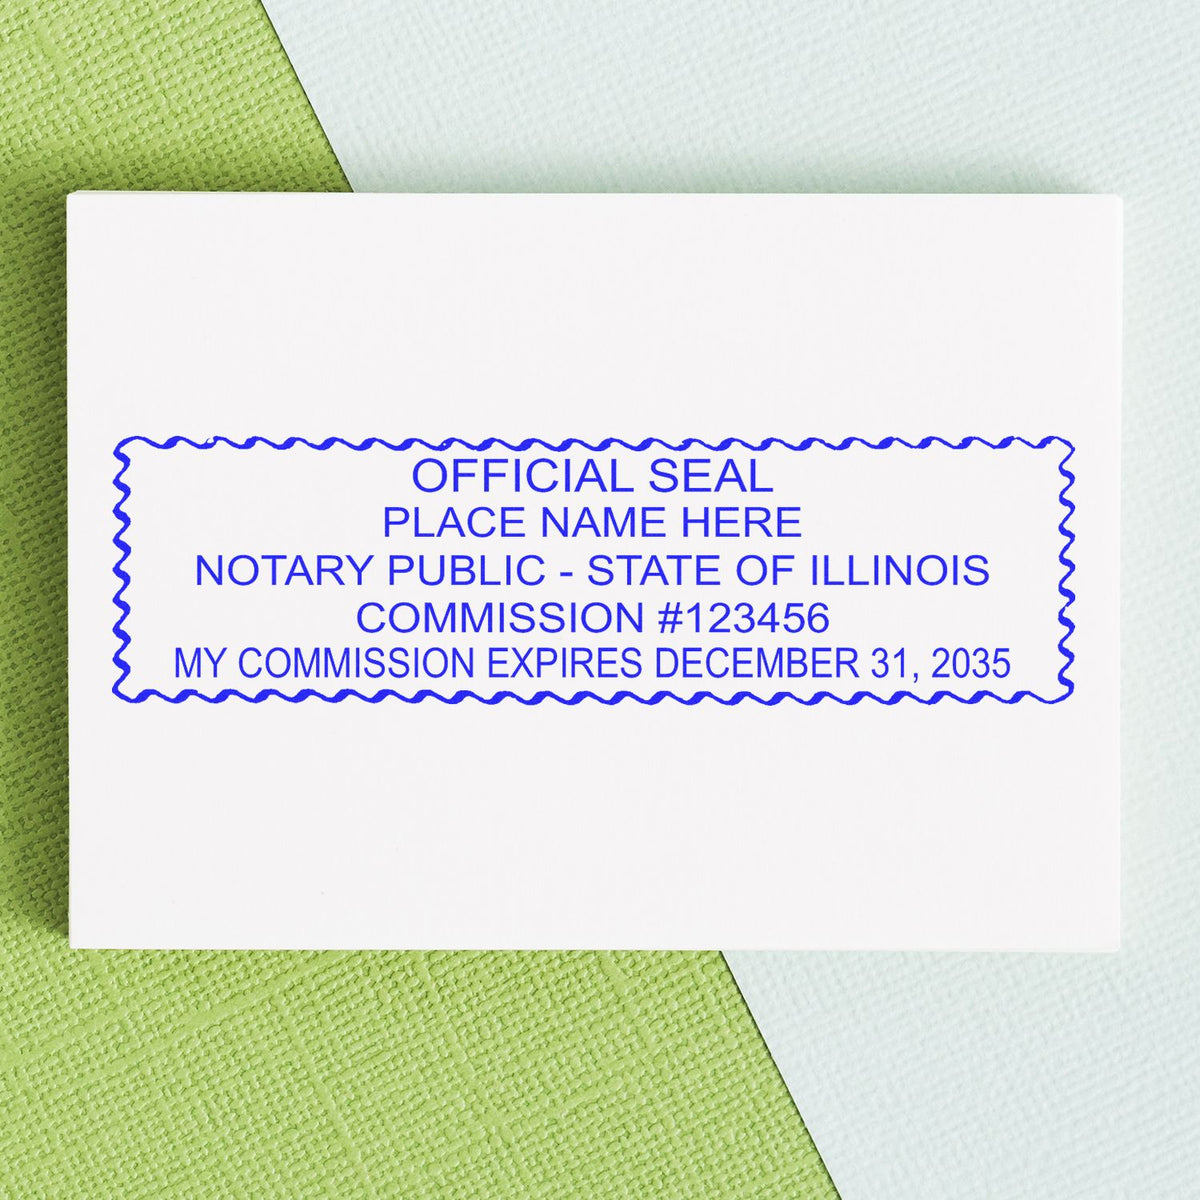 An alternative view of the Heavy-Duty Illinois Rectangular Notary Stamp stamped on a sheet of paper showing the image in use